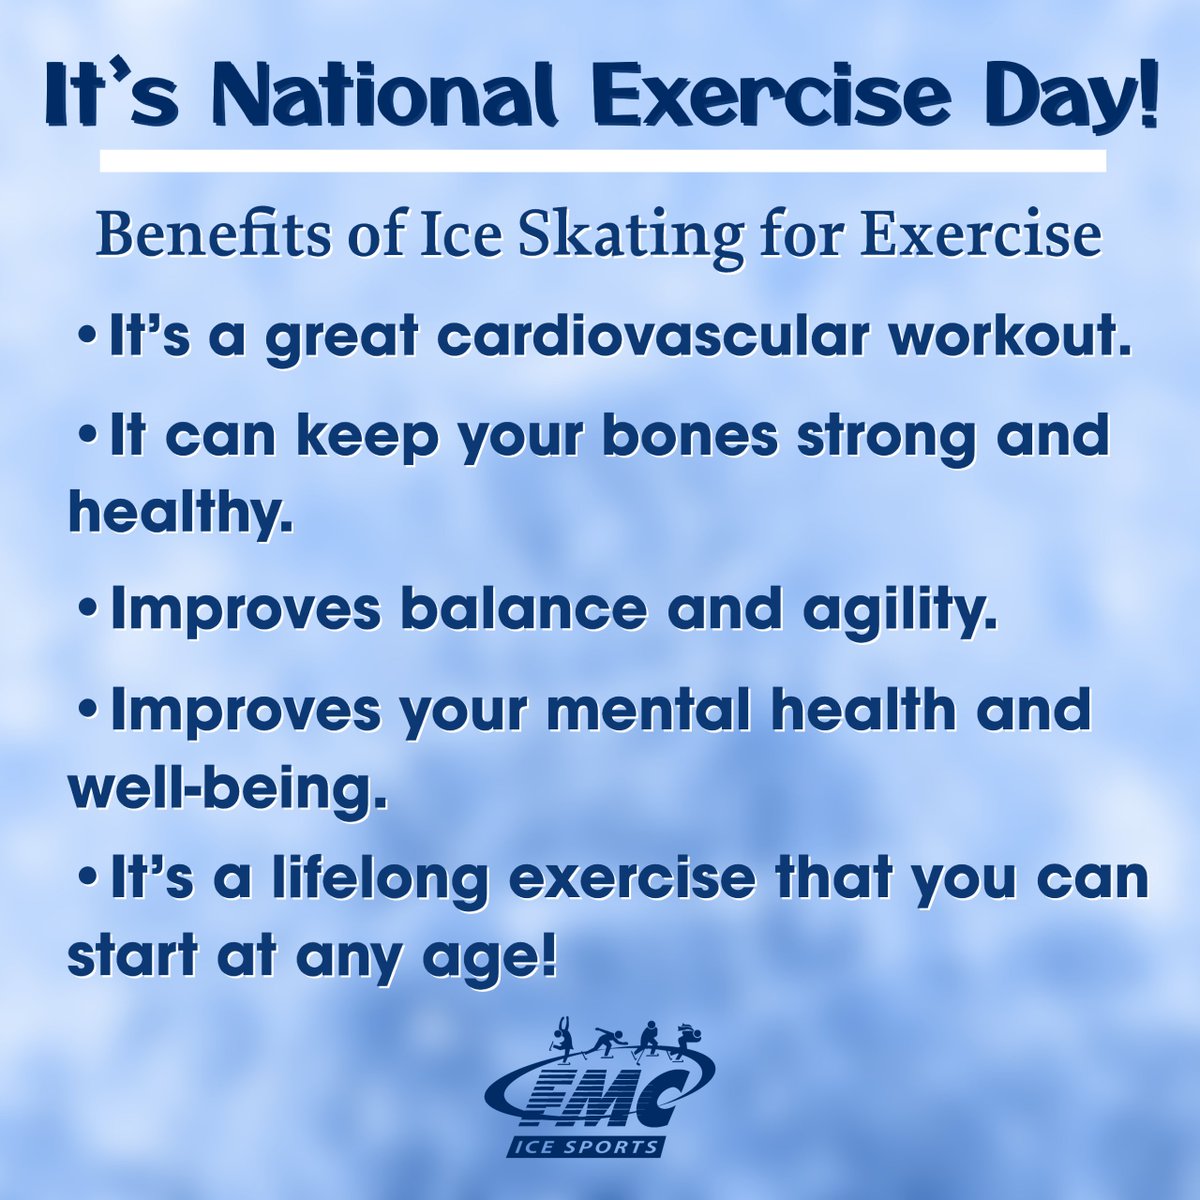 Get out and skate today on National Exercise Day! Don’t forget to sign up for our Late Spring Session of skating lessons!